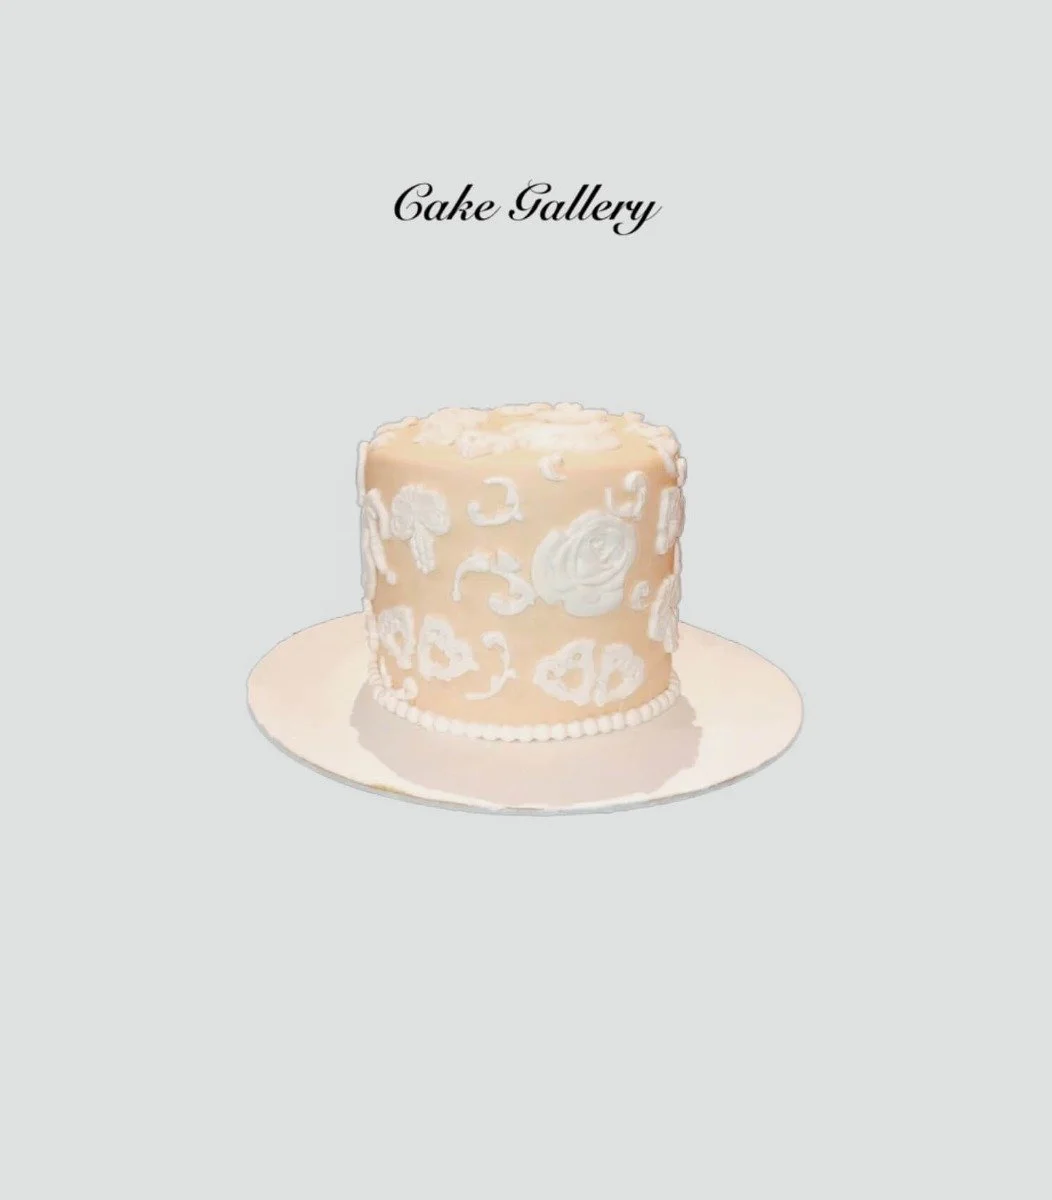 Off White Cake by Cake Gallery